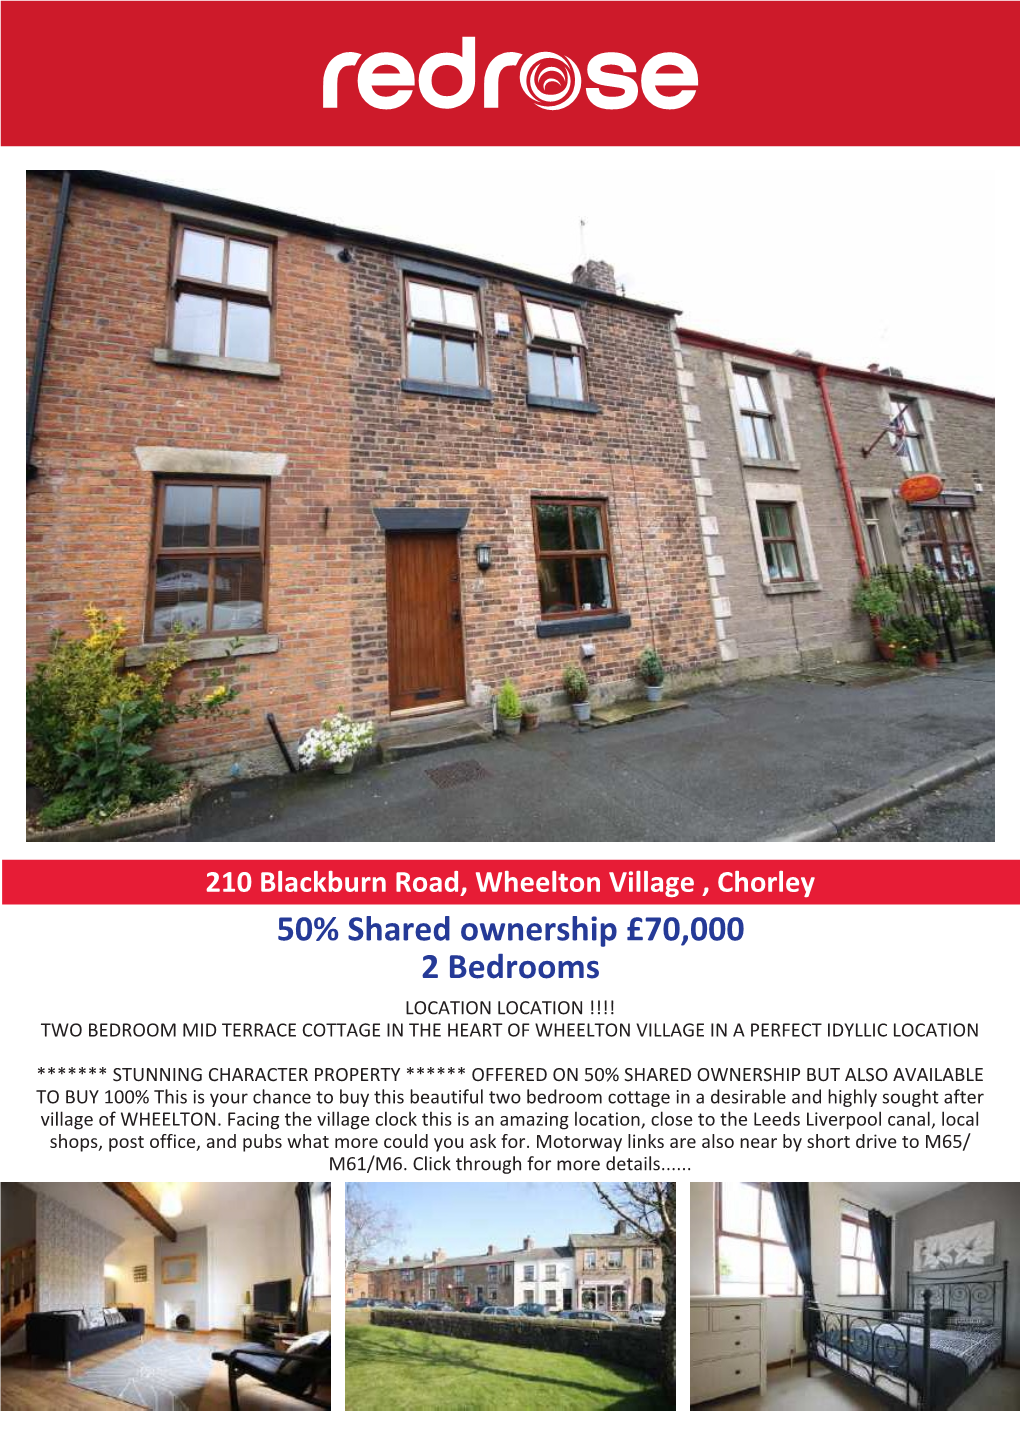 50% Shared Ownership £70,000 2 Bedrooms LOCATION LOCATION !!!! TWO BEDROOM MID TERRACE COTTAGE in the HEART of WHEELTON VILLAGE in a PERFECT IDYLLIC LOCATION